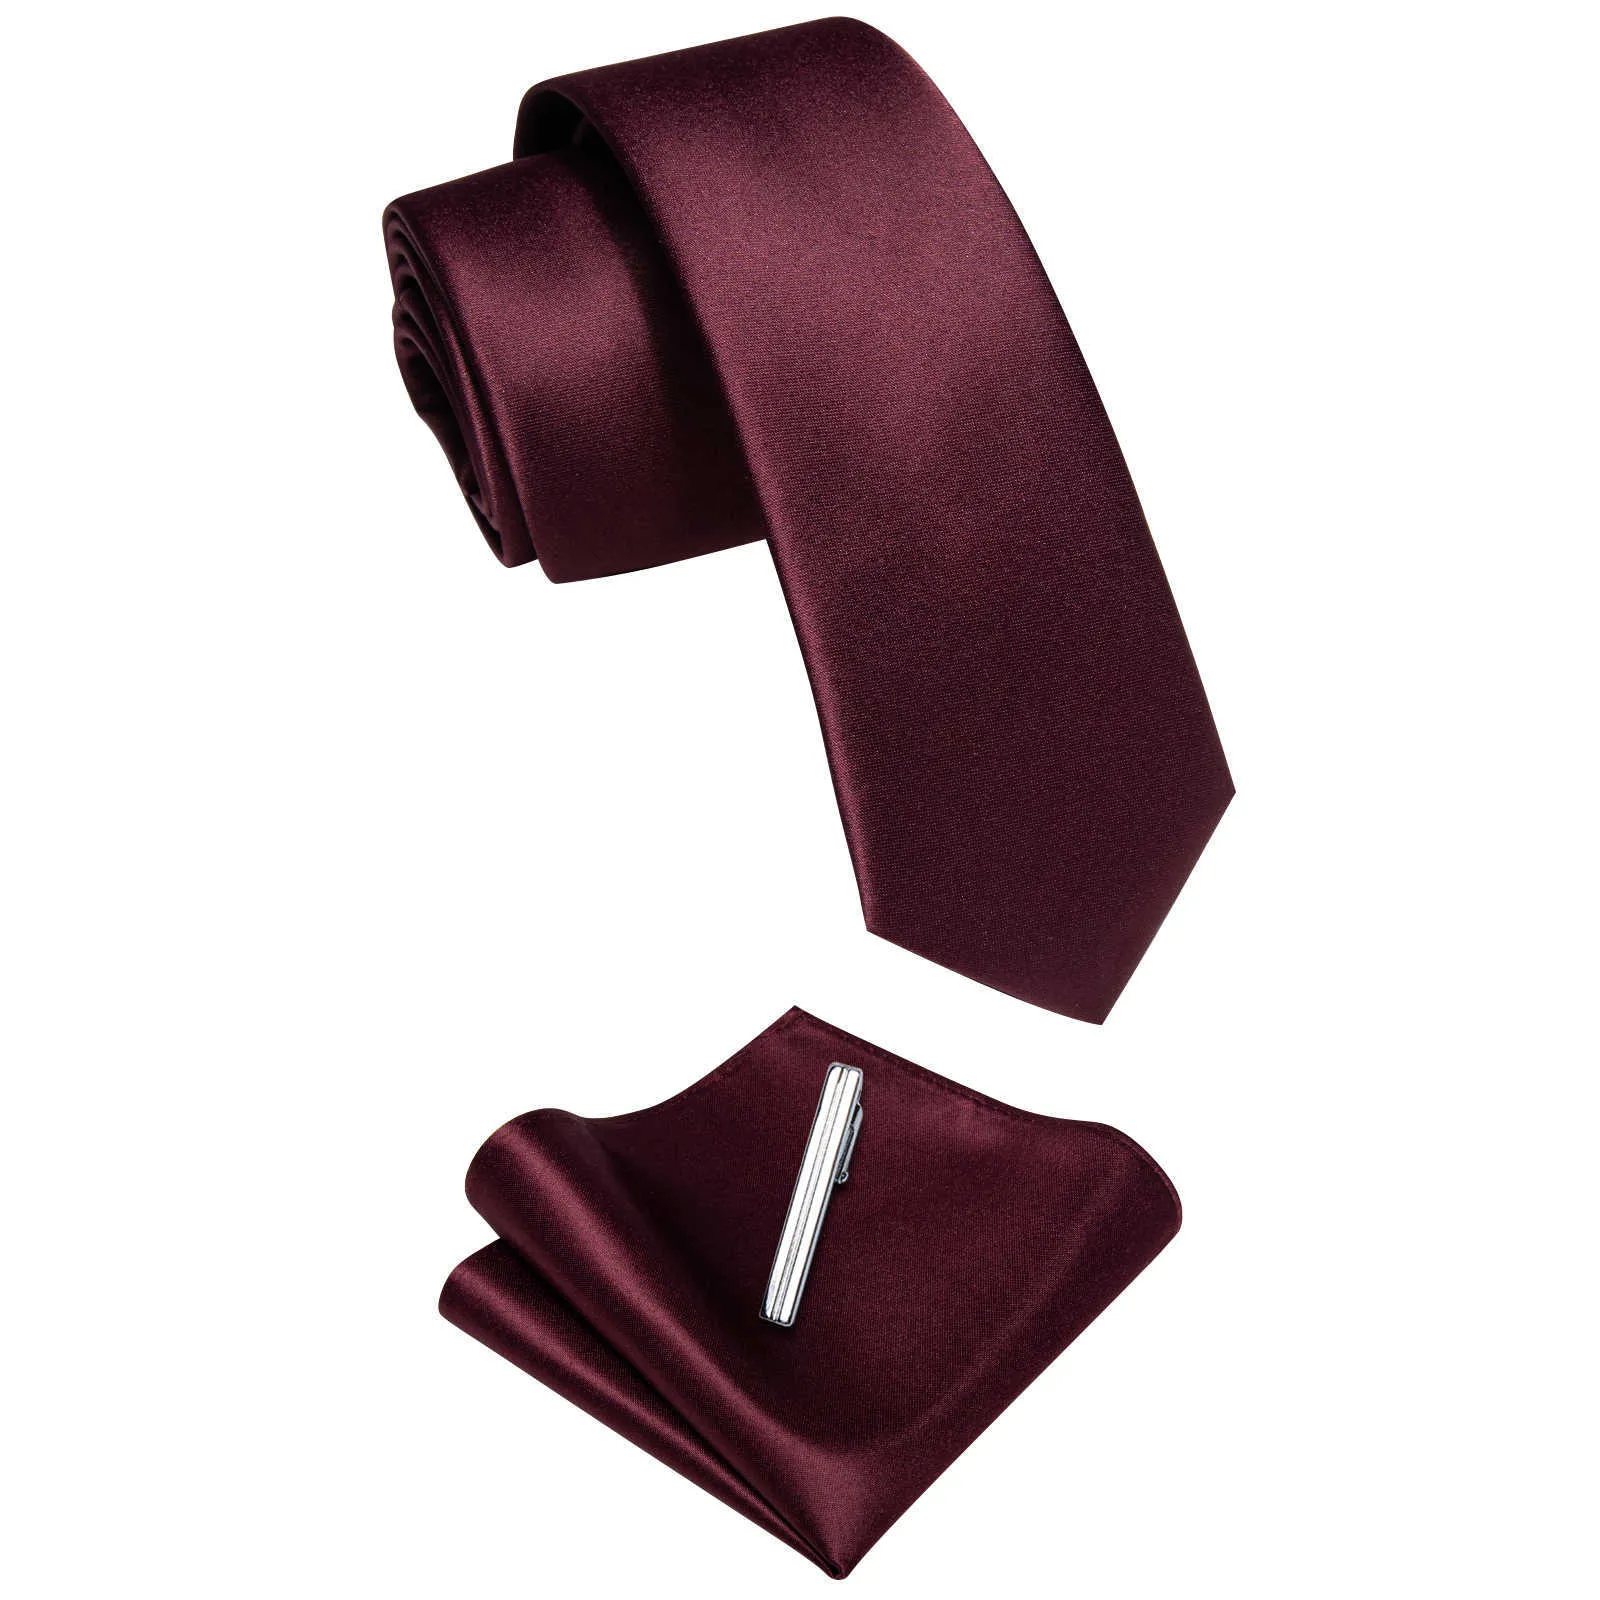 Neck Band Bourgogne Red Luxury Men's Tie Pocket Square Clip Set Fashion Silk Exported Brand 6 cm Slim Slips For Man Accessories Gifts